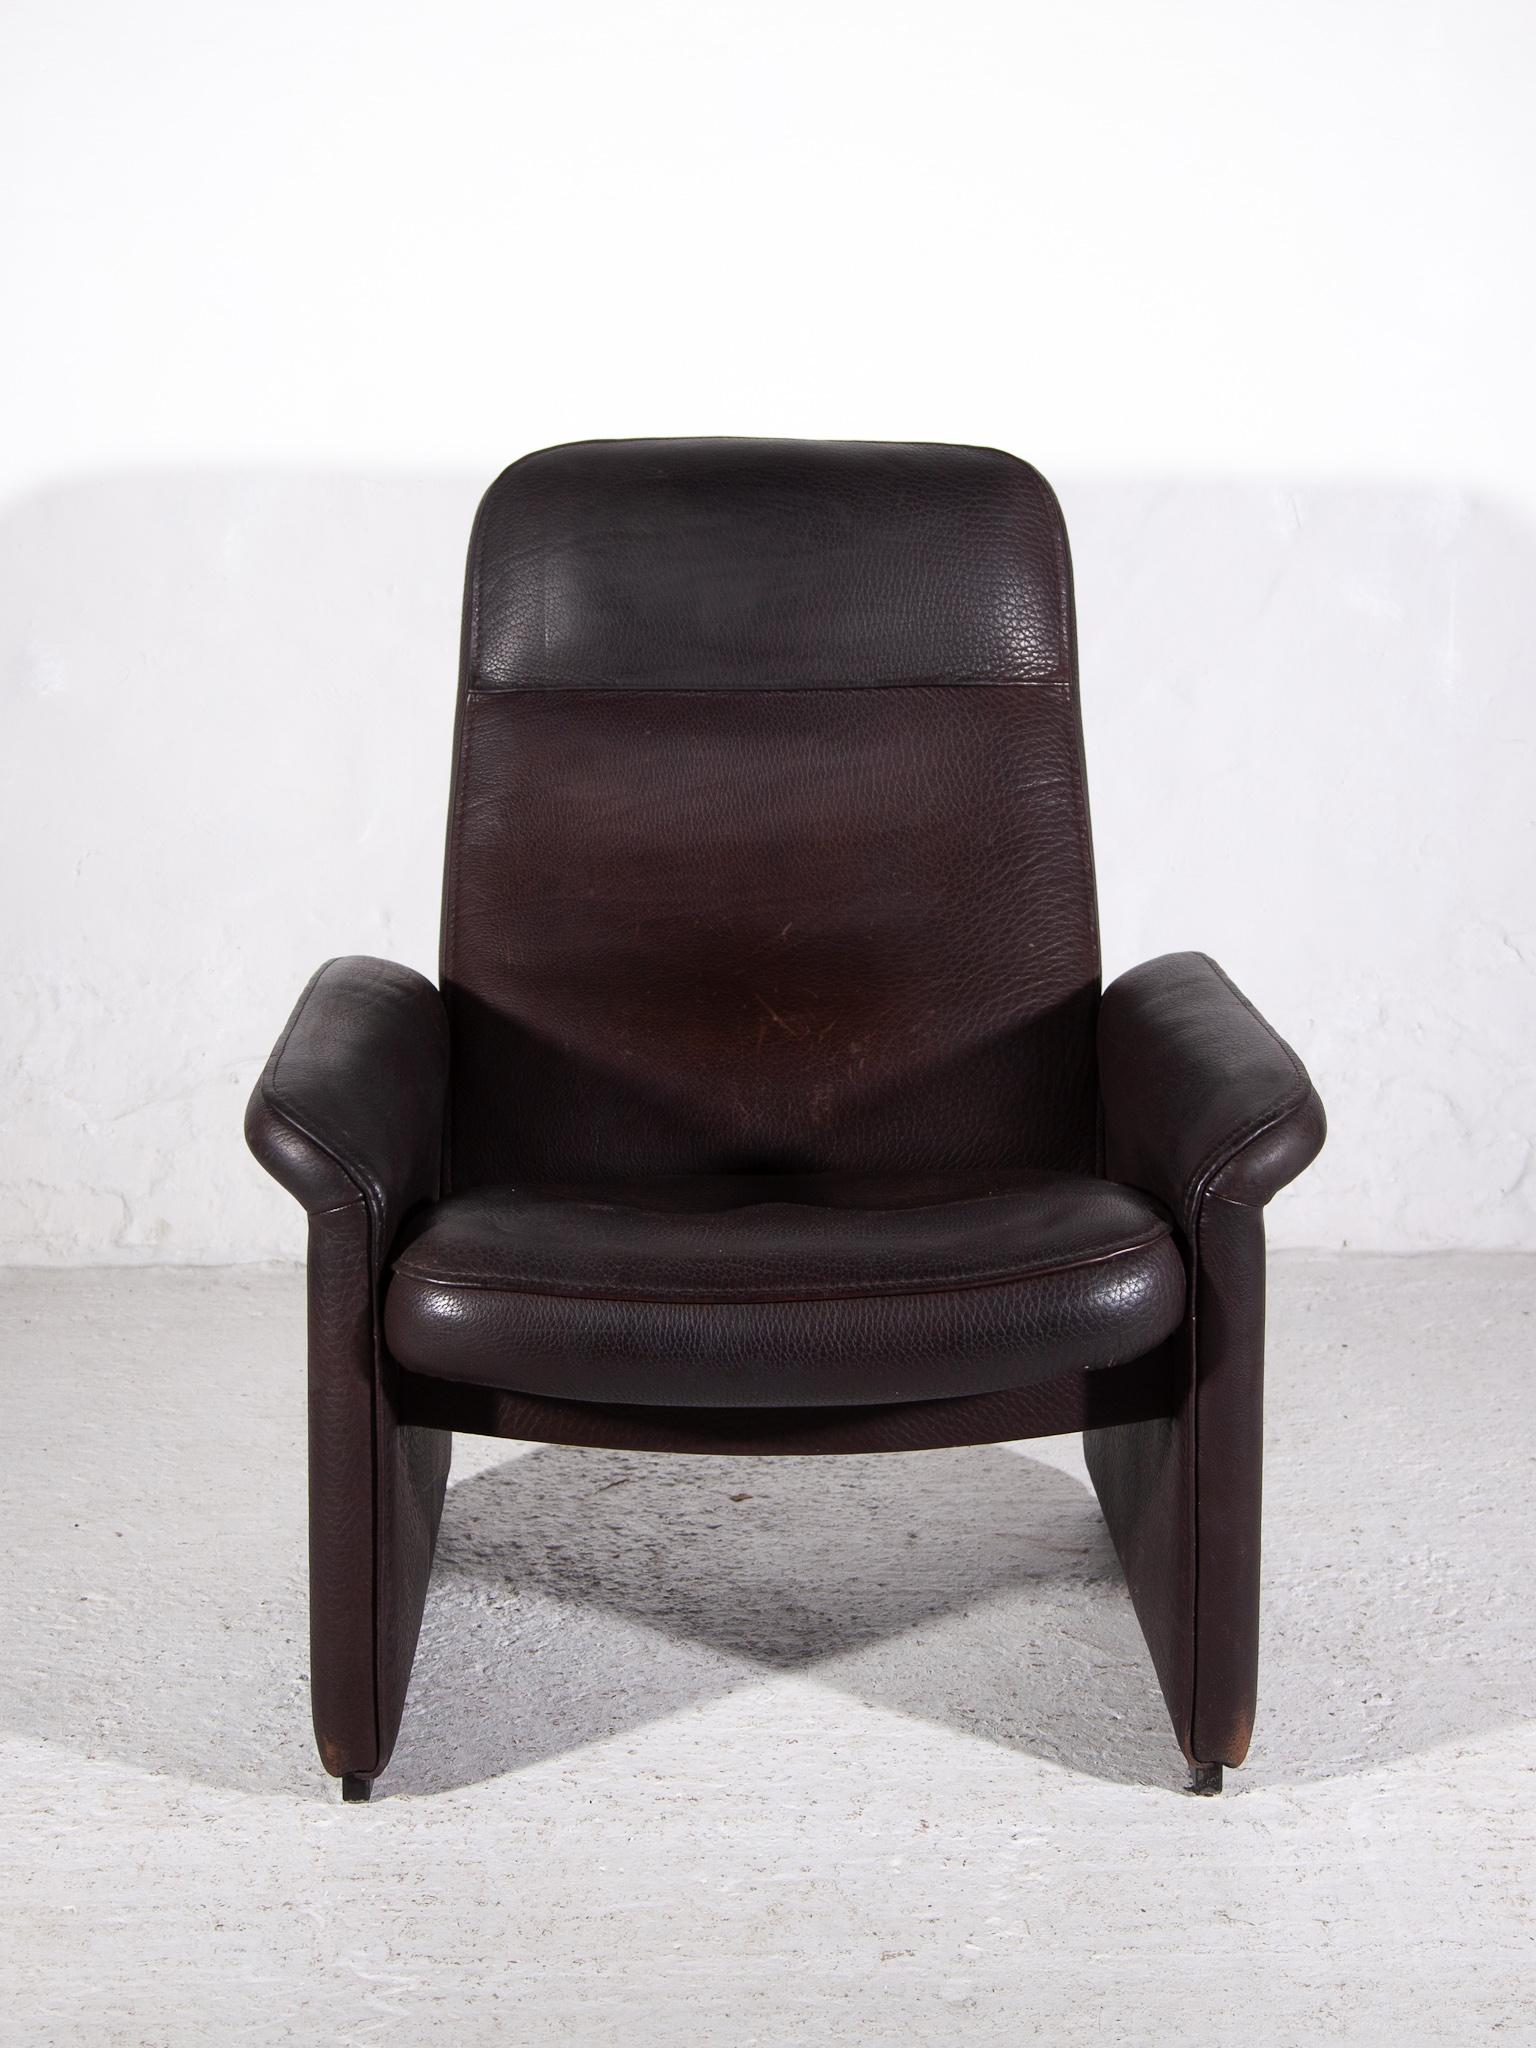 De Sede DS 50 leather comfortable reclining armchair, Switzerland 1970s. Built to incredibly high standards by de Sede craftsman in Switzerland, this original DS 50 reclining lounge armchair is upholstered in stunning chocolate brownt thick buffalo